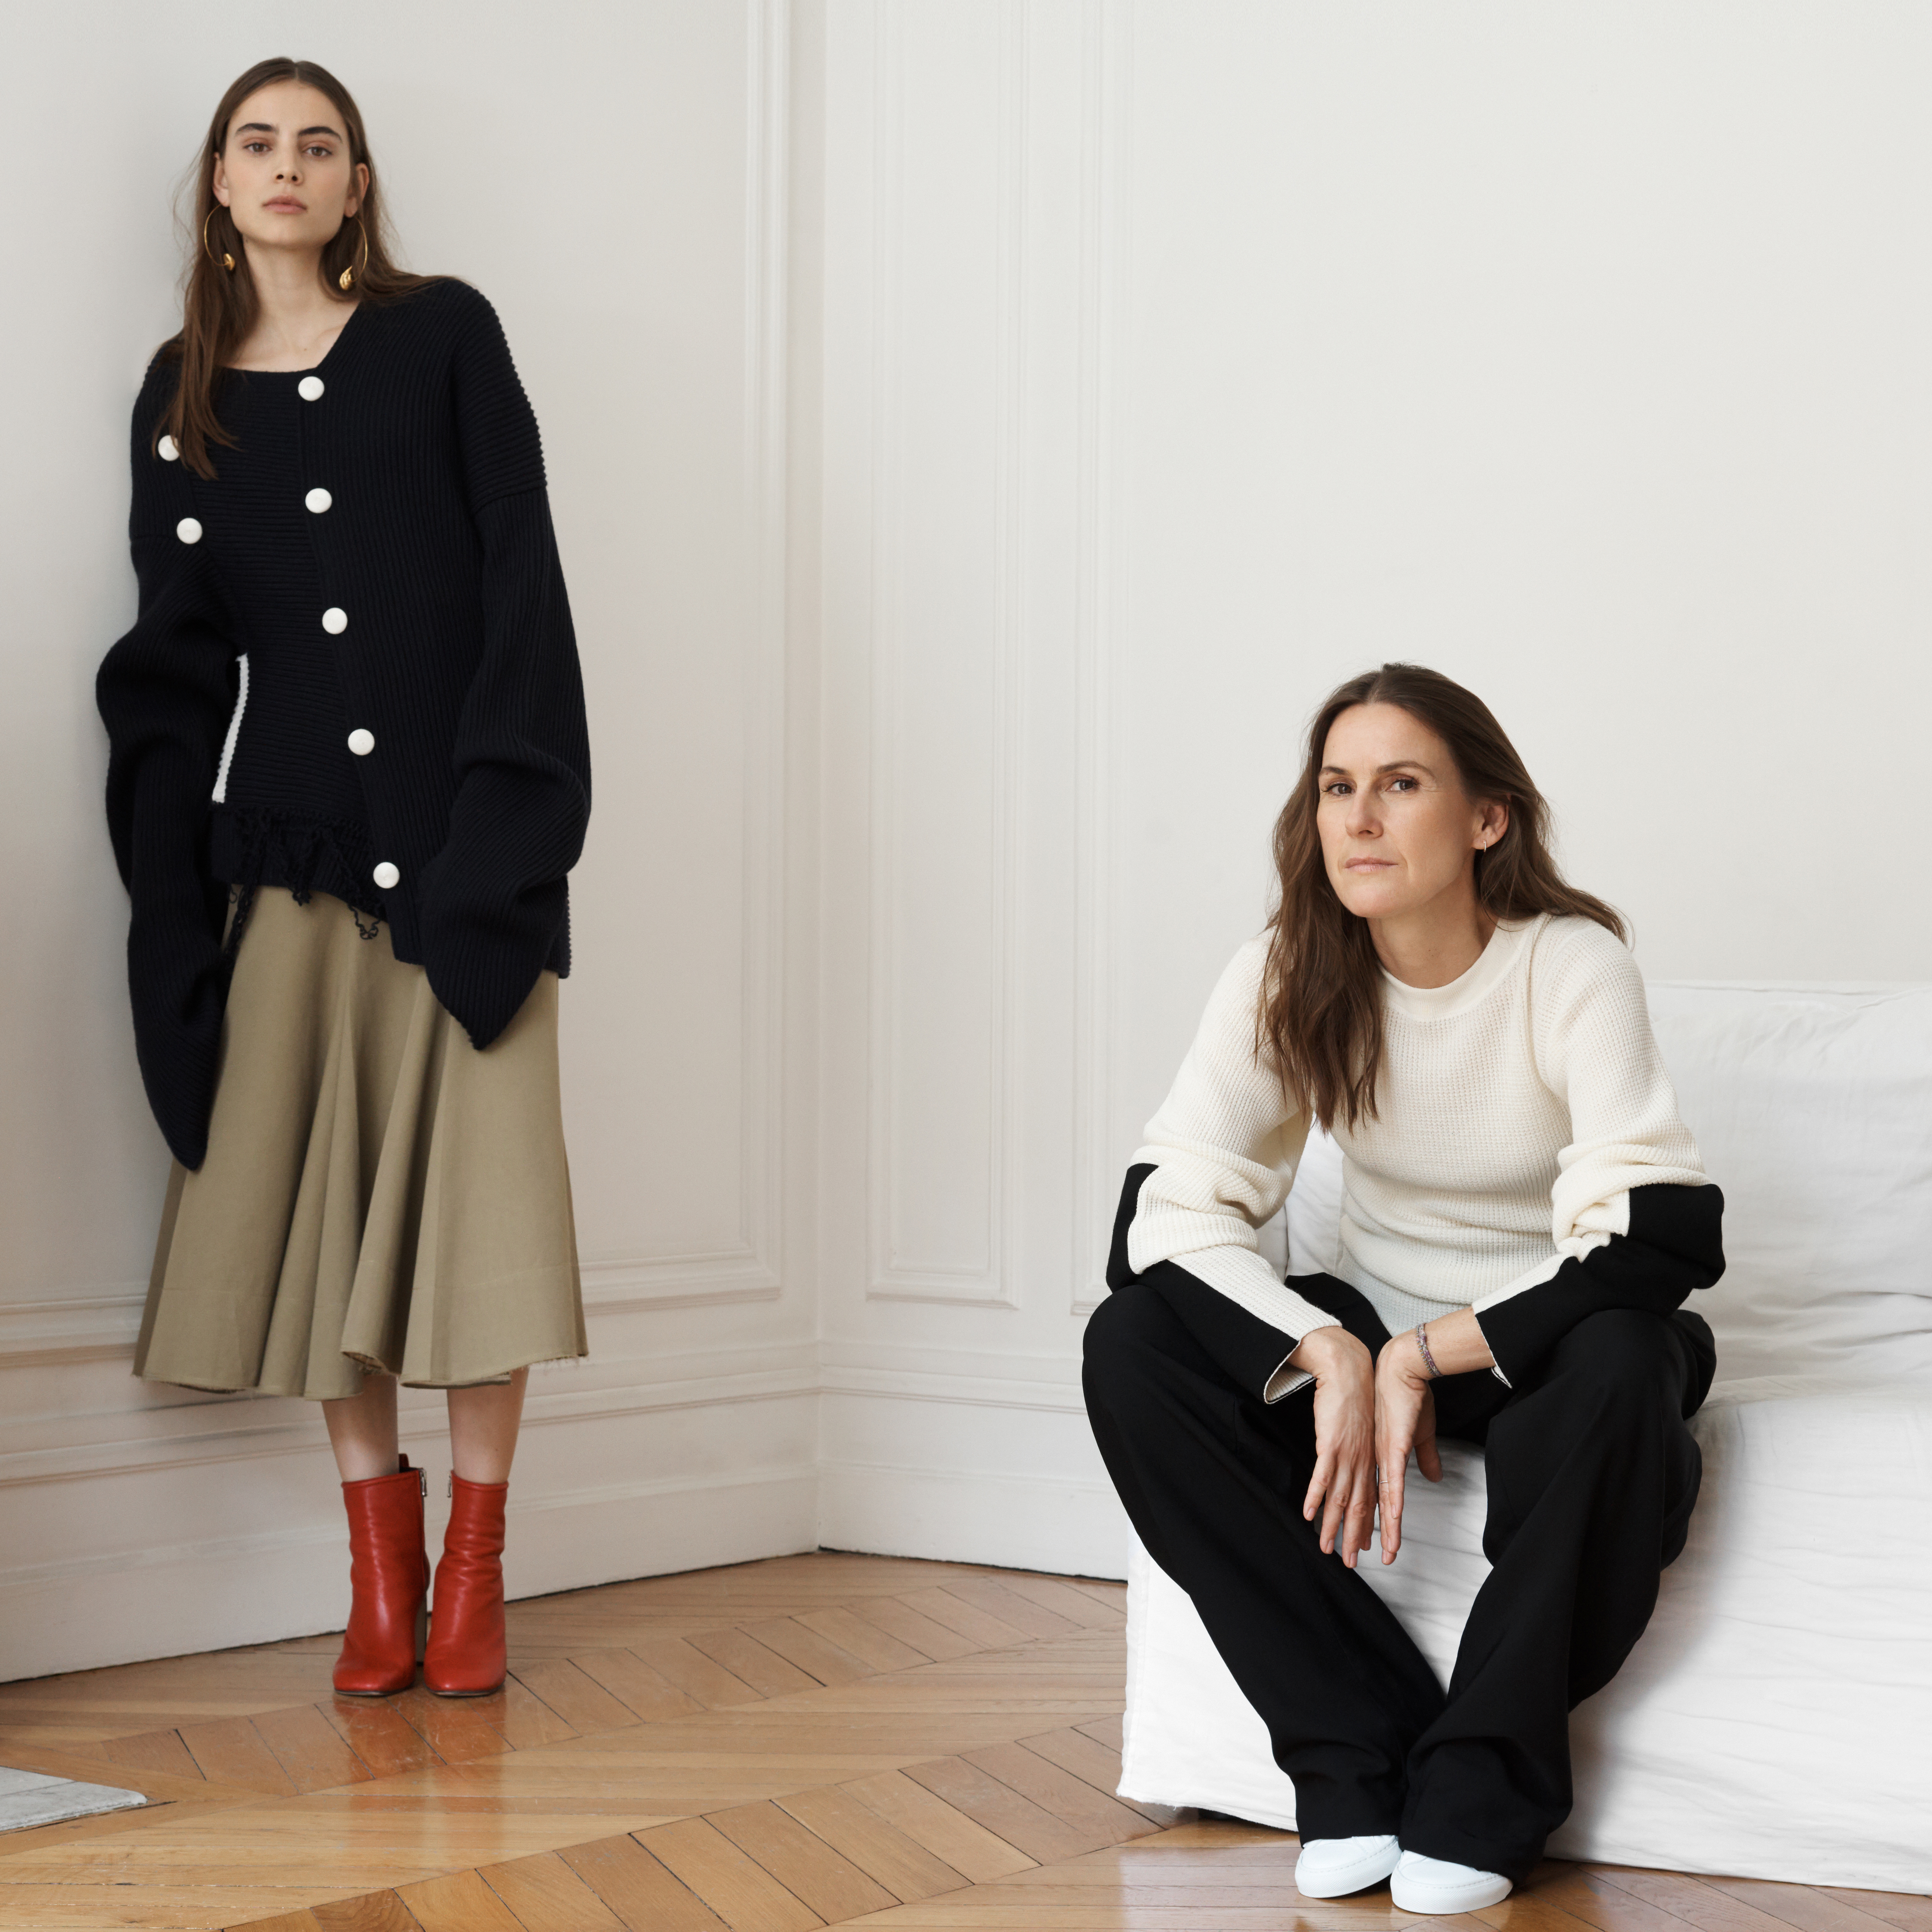 Lacoste's Louise Trotter: Interview, Design History